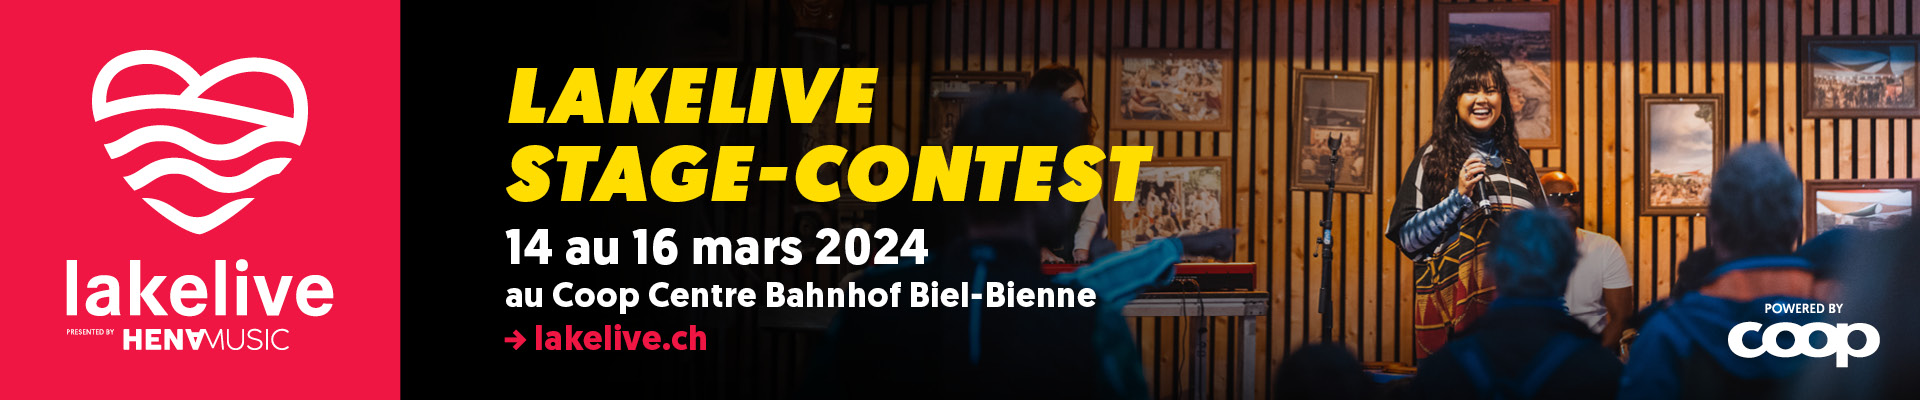 Lakelive Stage-Contest